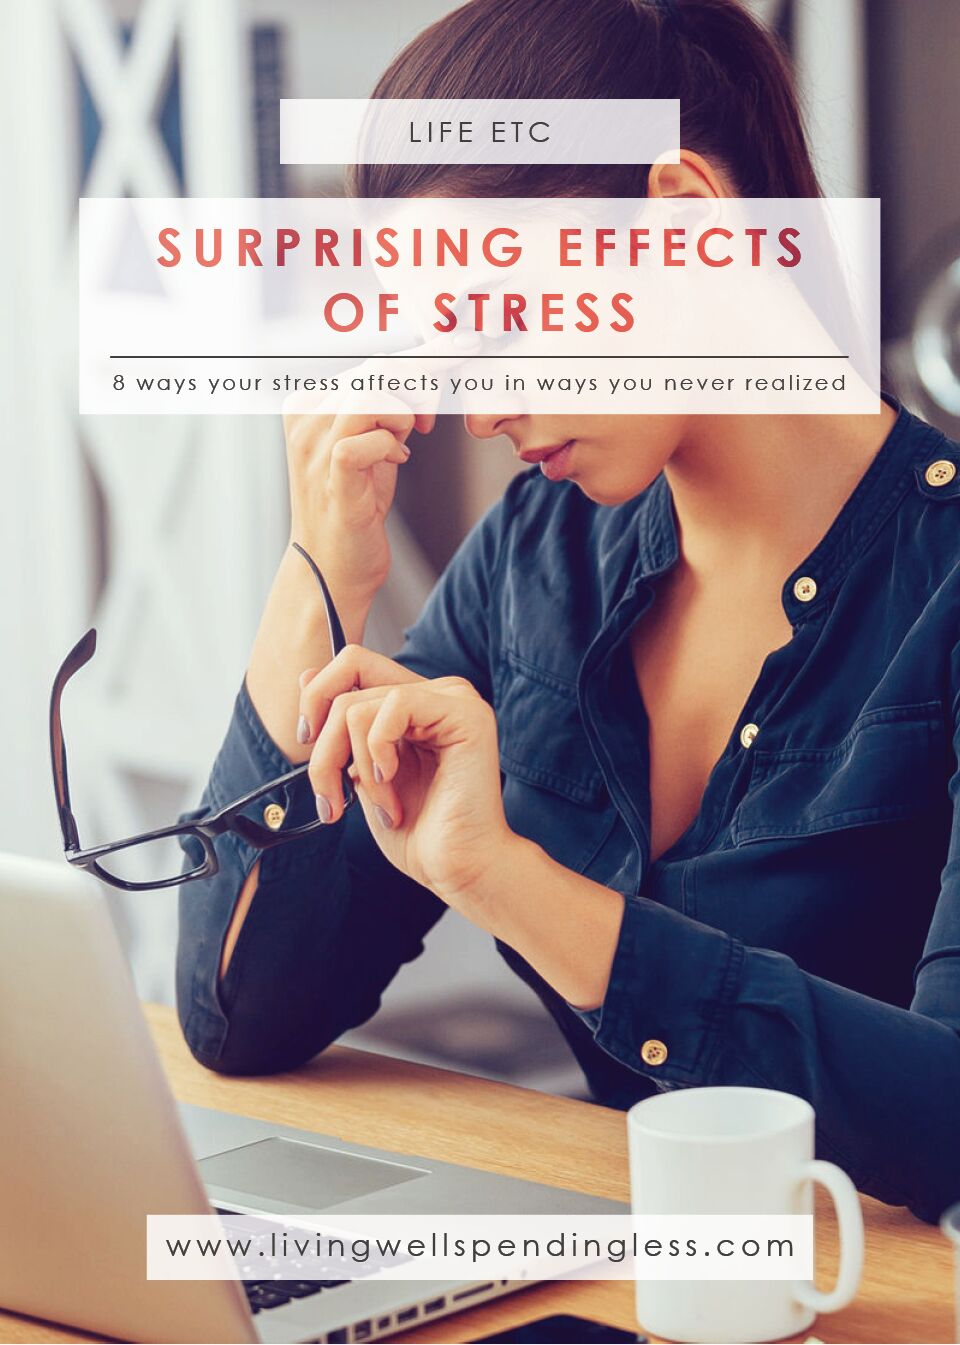 Effects of Stress | Health & Wellness | Effects of Stress on the Body | Stress Management | Harmful Effects of Stress 